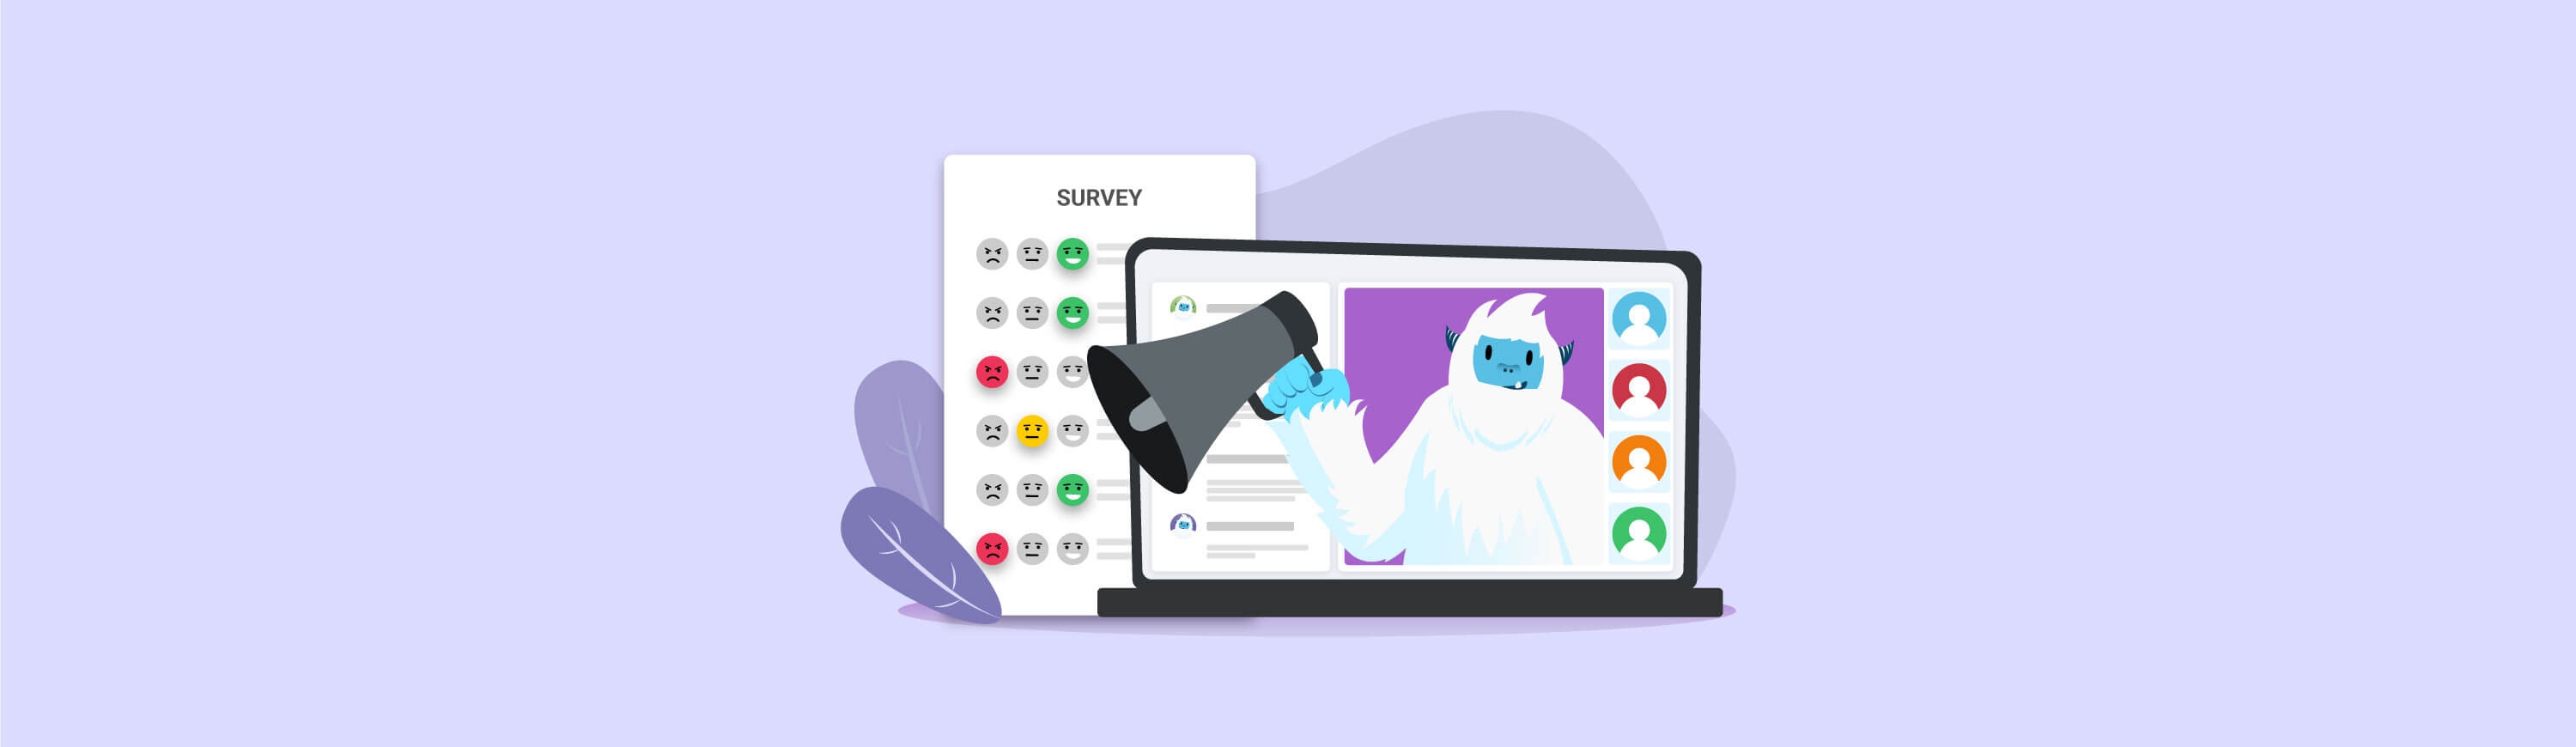 Illustration of Carl the yeti holding a megaphone next to a page with a survey on it.